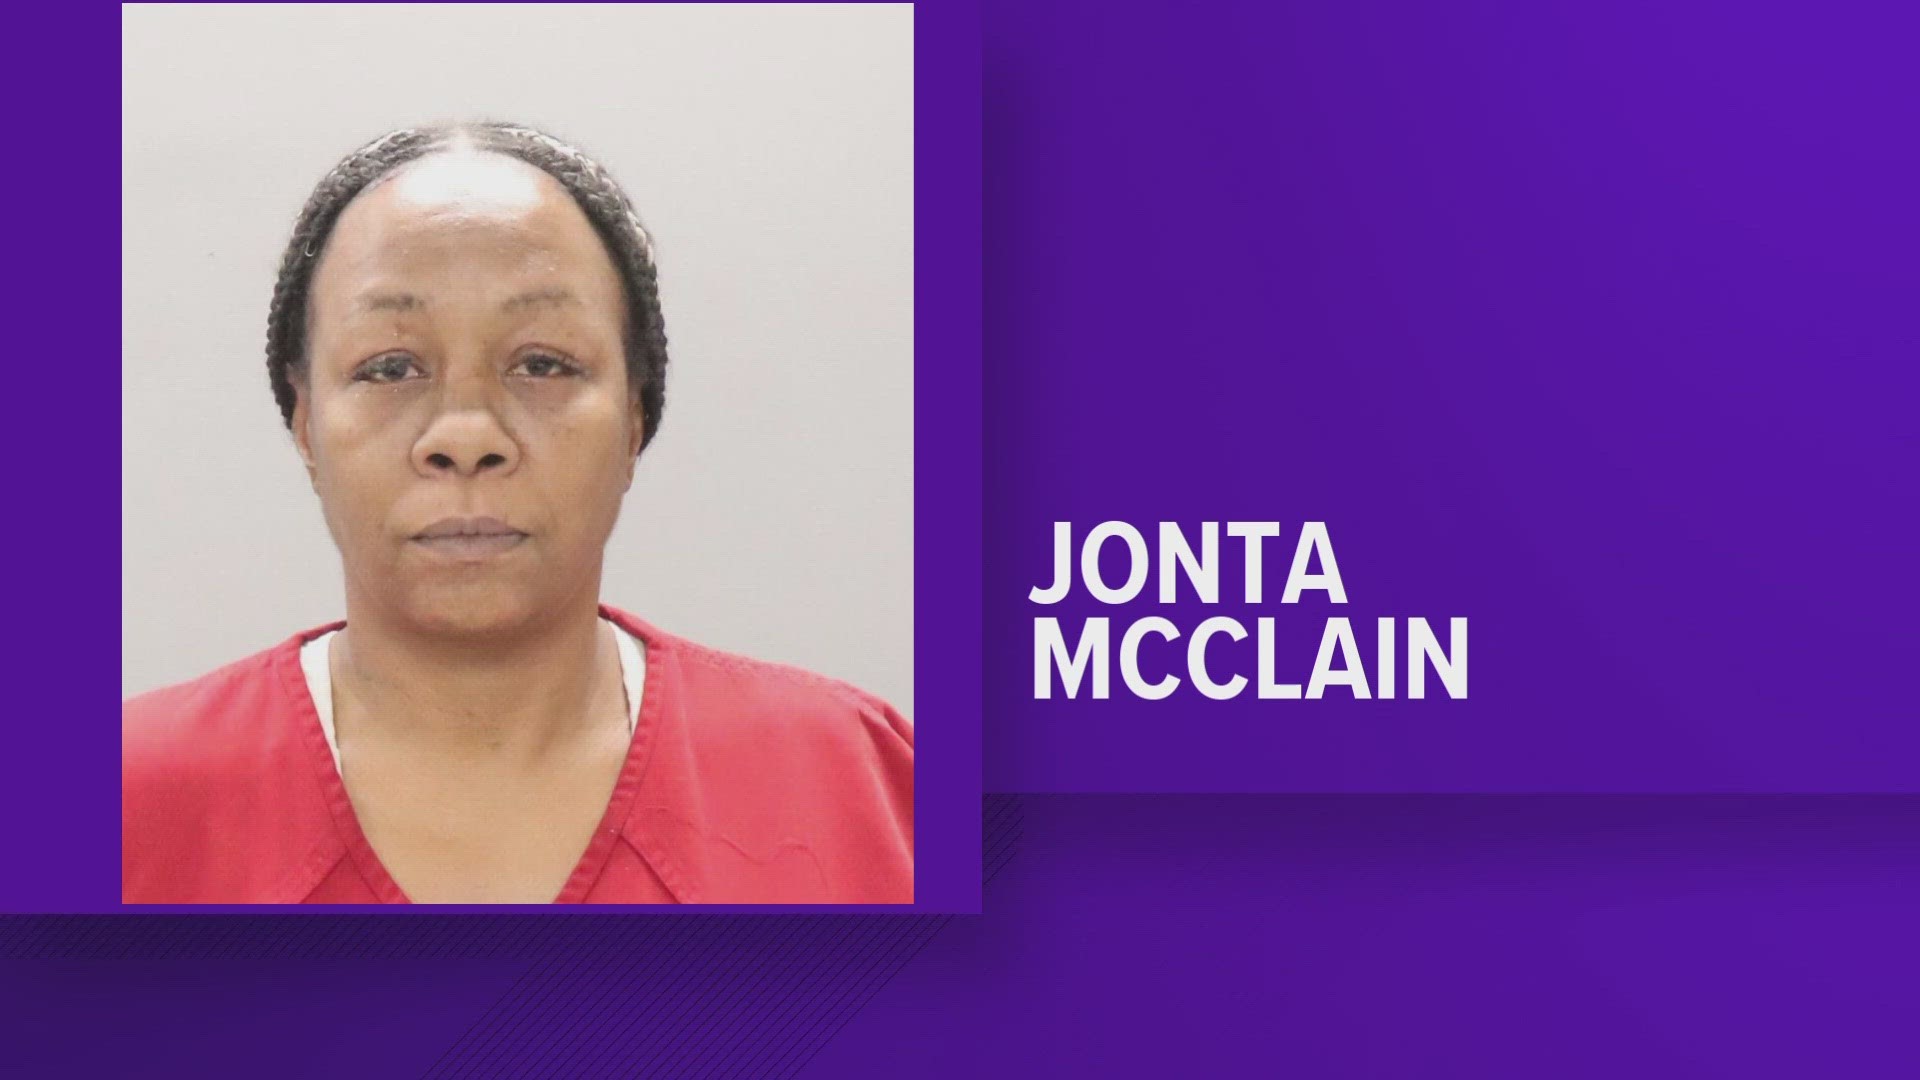 Records show Jonta McClain and a man got into a fight at 3 a.m. on Saturday. She fired a revolver multiple times and hit him three times, officials say.